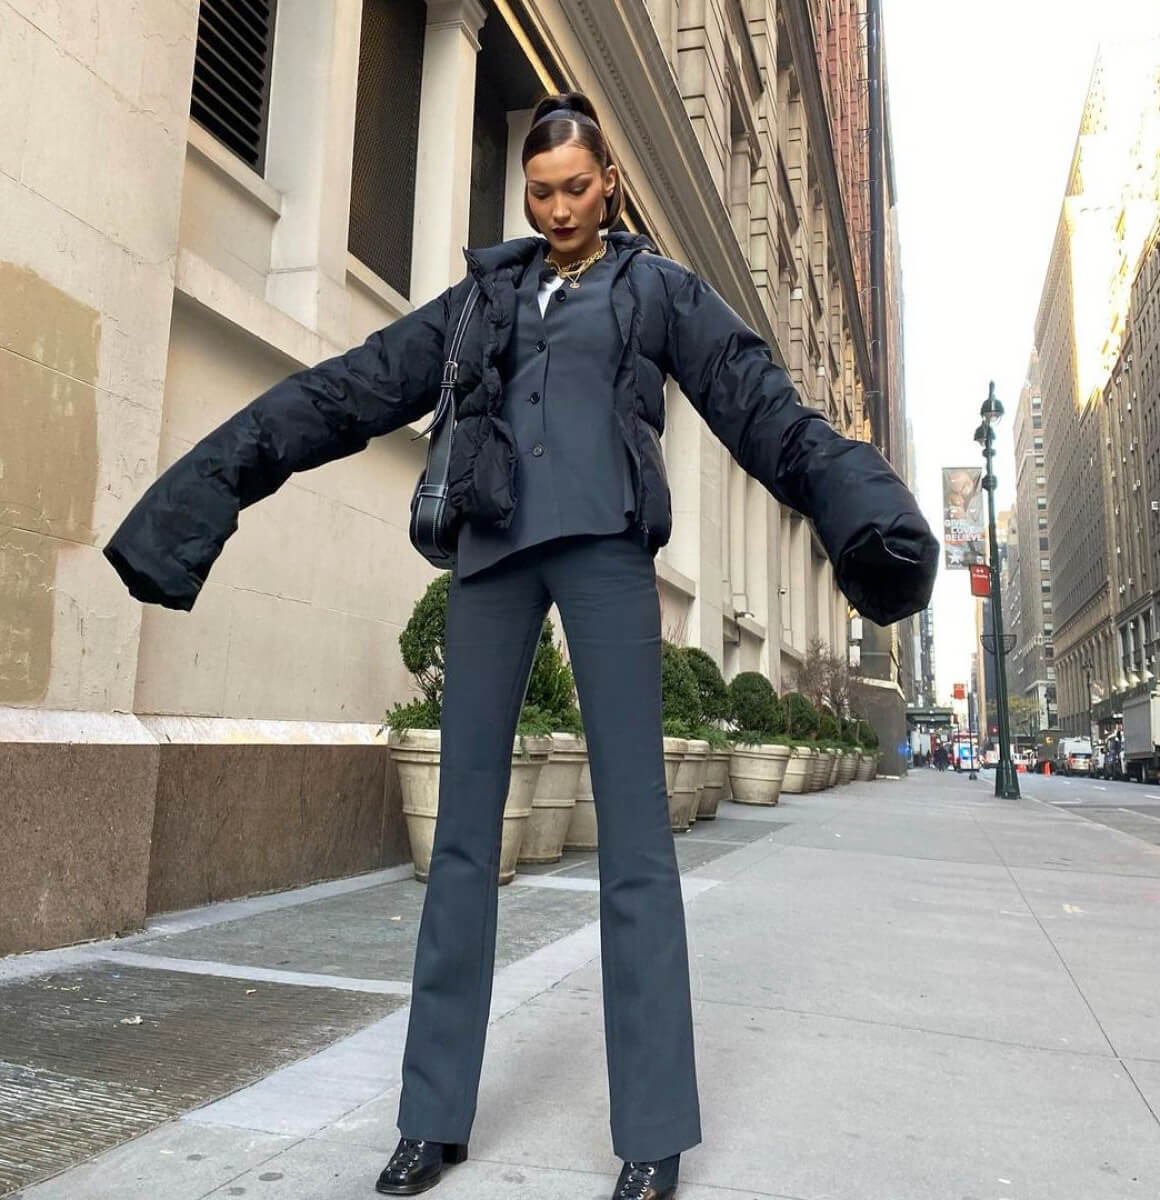 Bella Hadid in Fully Black Outfit - Instagram Photos 12/04/2020 2